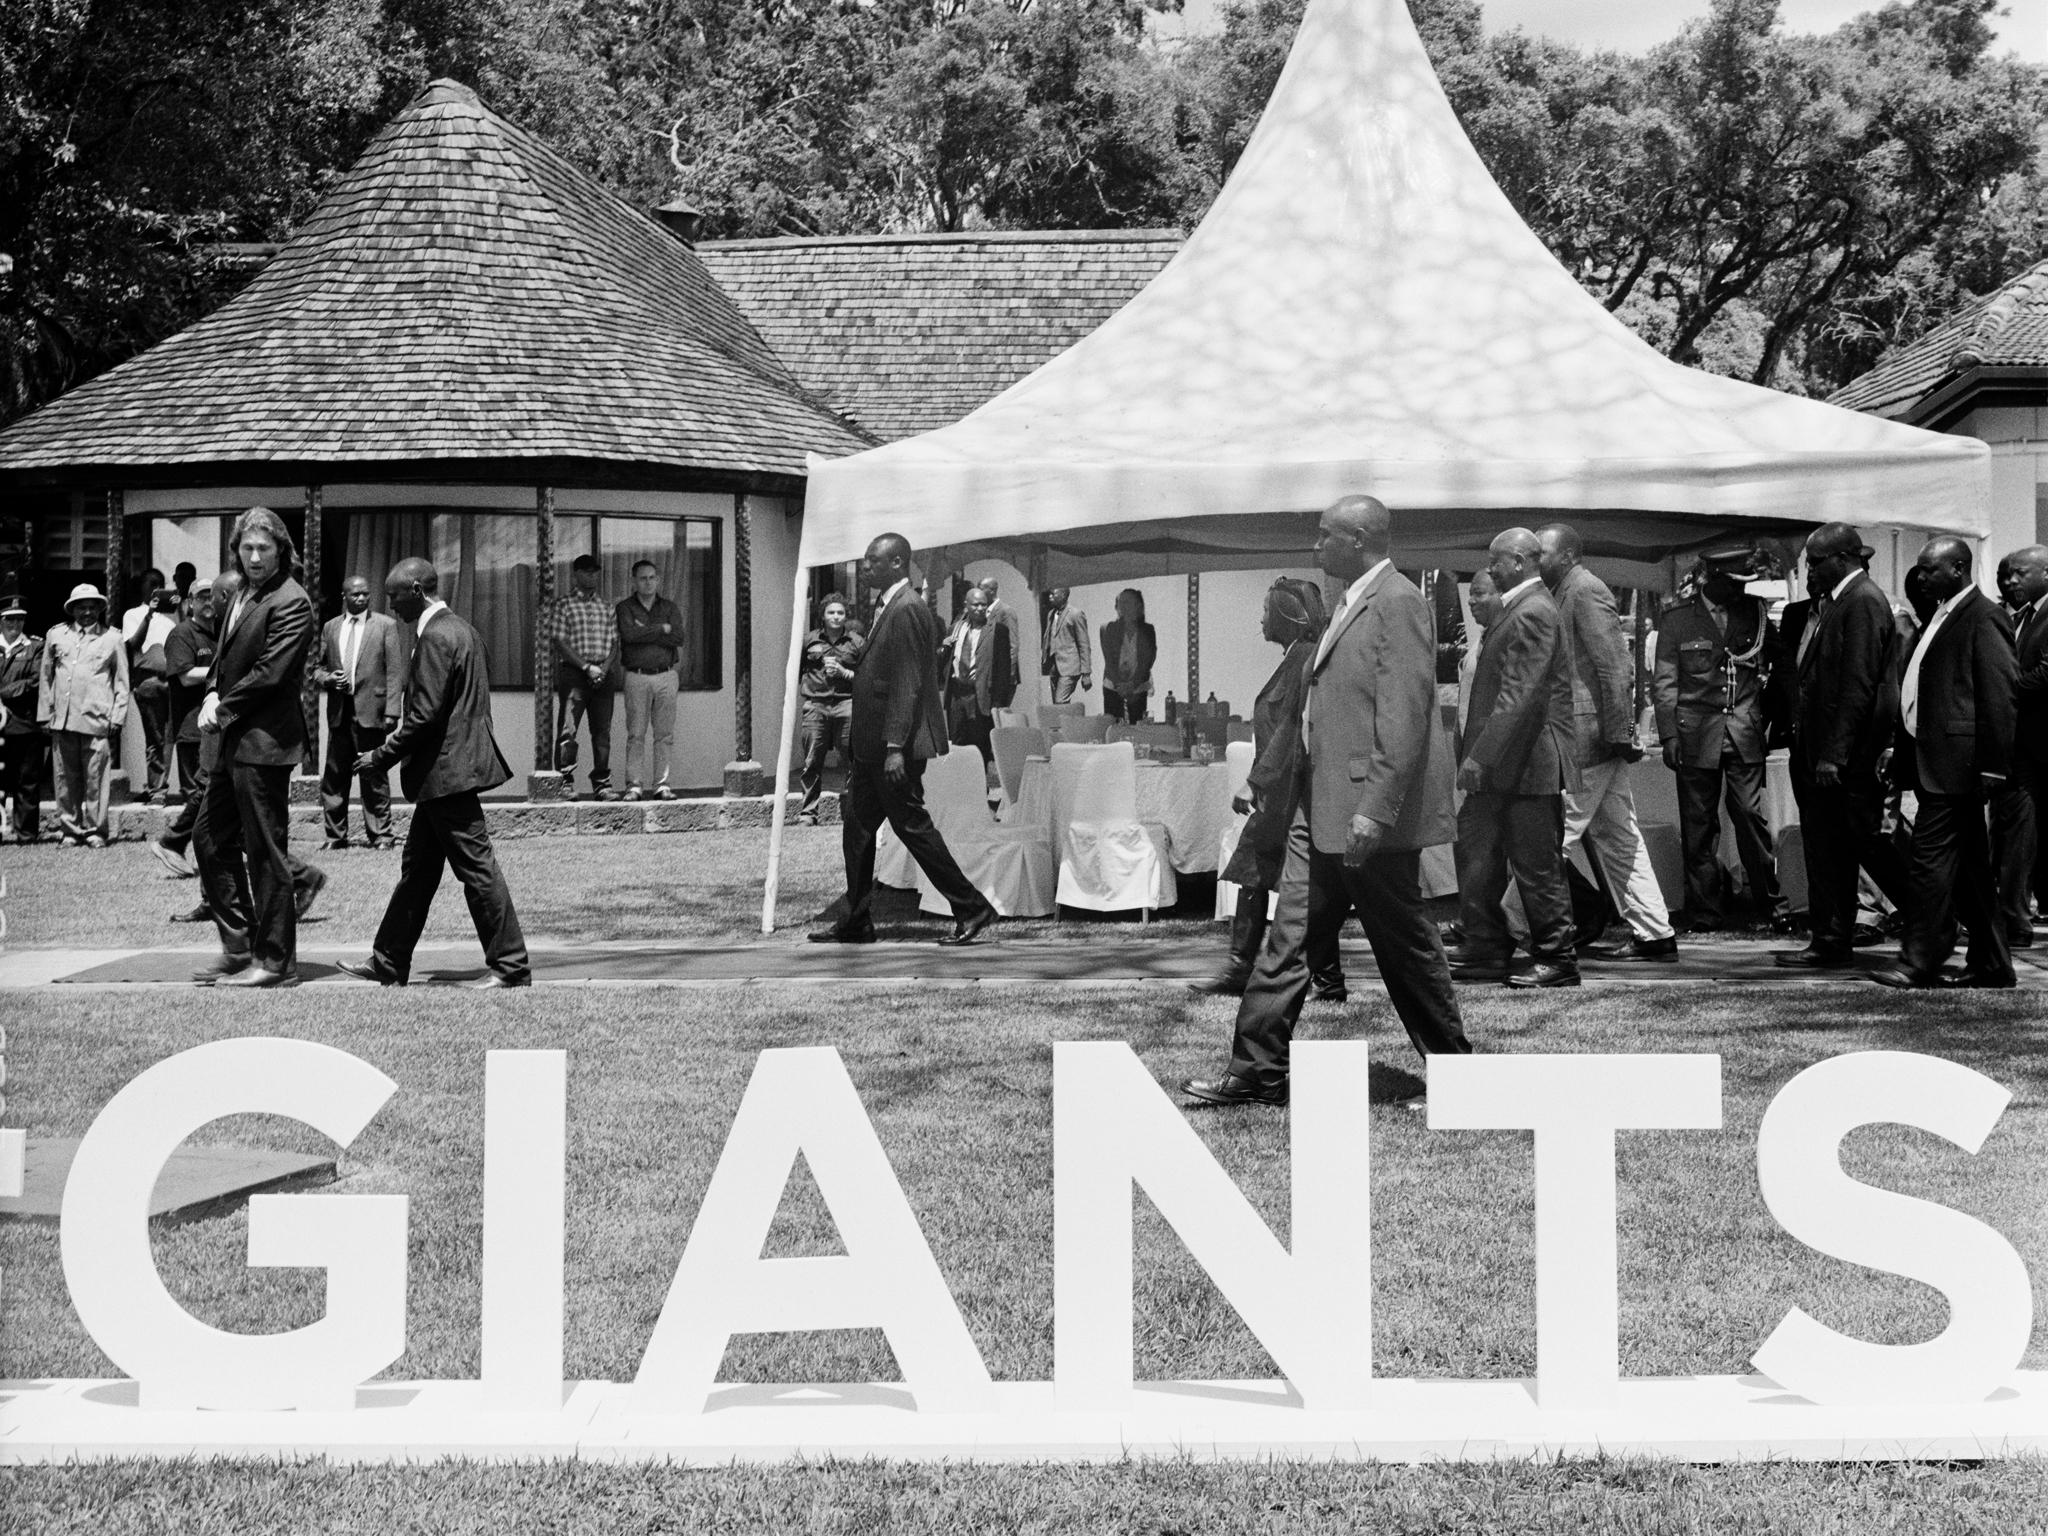 The Giants Club recently had its inaugural summit at the Fairview Mount Kenya Safari Club in the foothills of Mt Kenya where its supporters met to expand these programmes and develop new ways to combat the poaching crisis, as well as to protect the habitats elephants depend on.